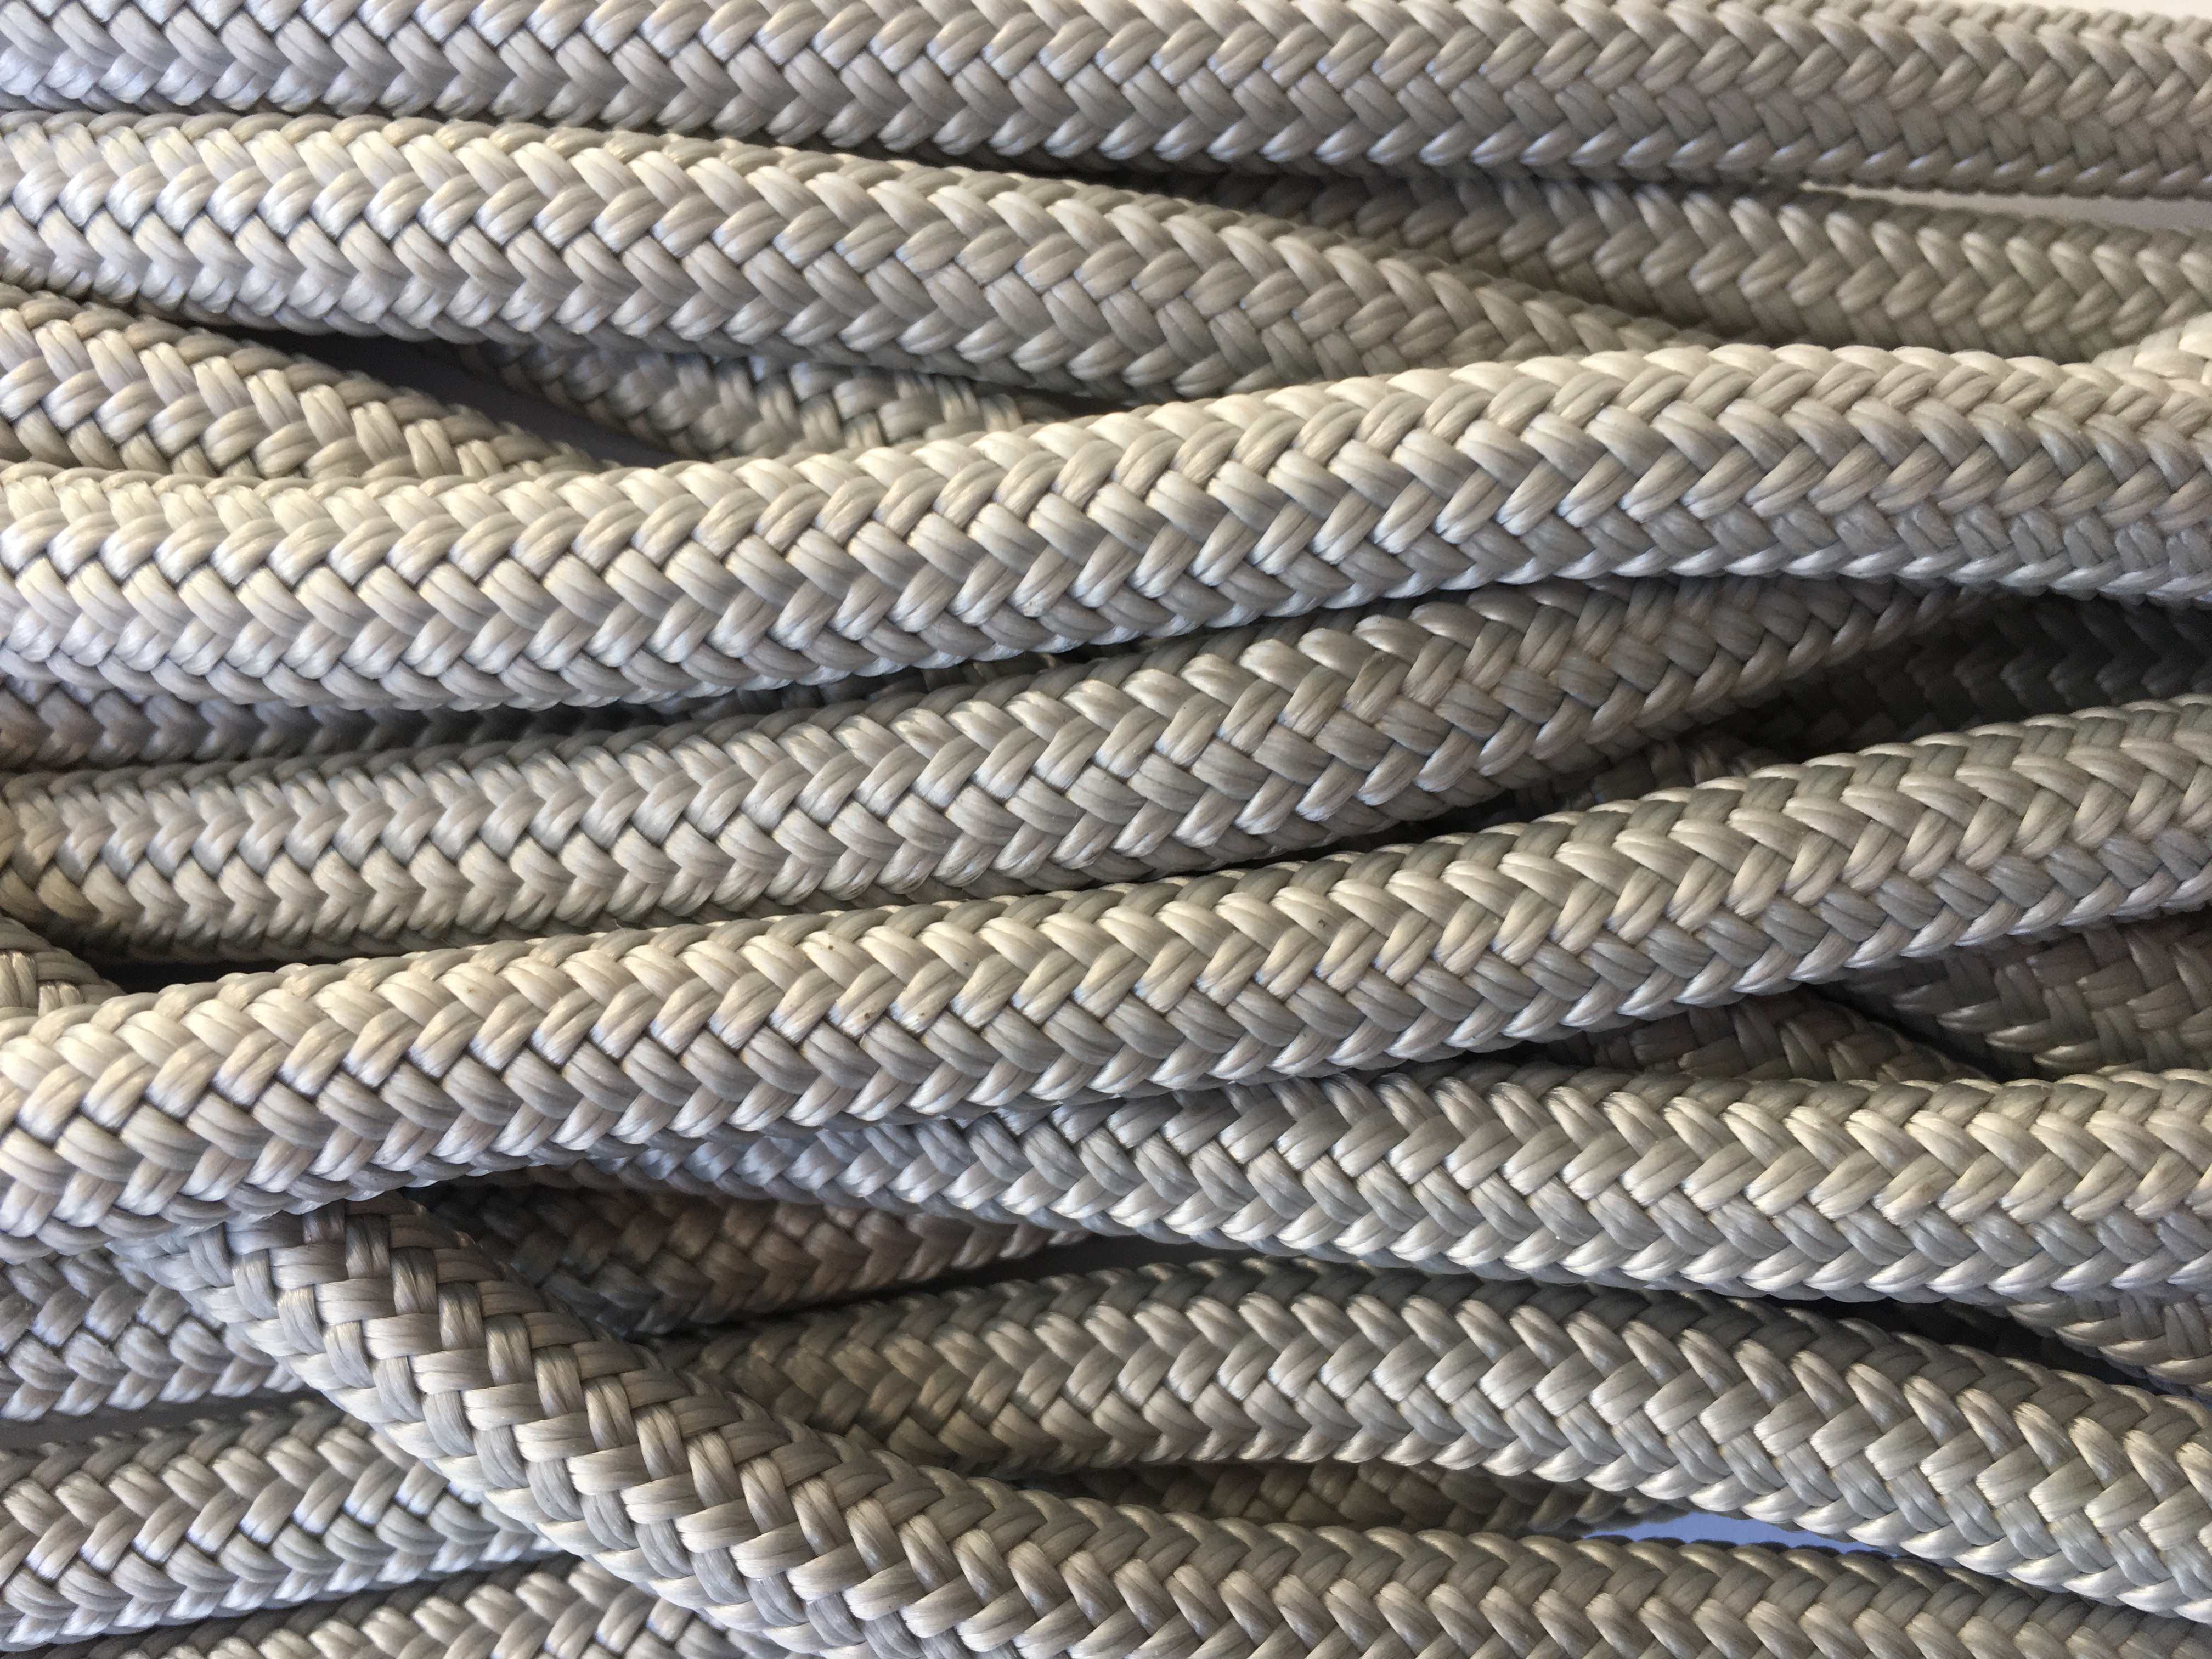 Reduction of rope's overall tensile strength